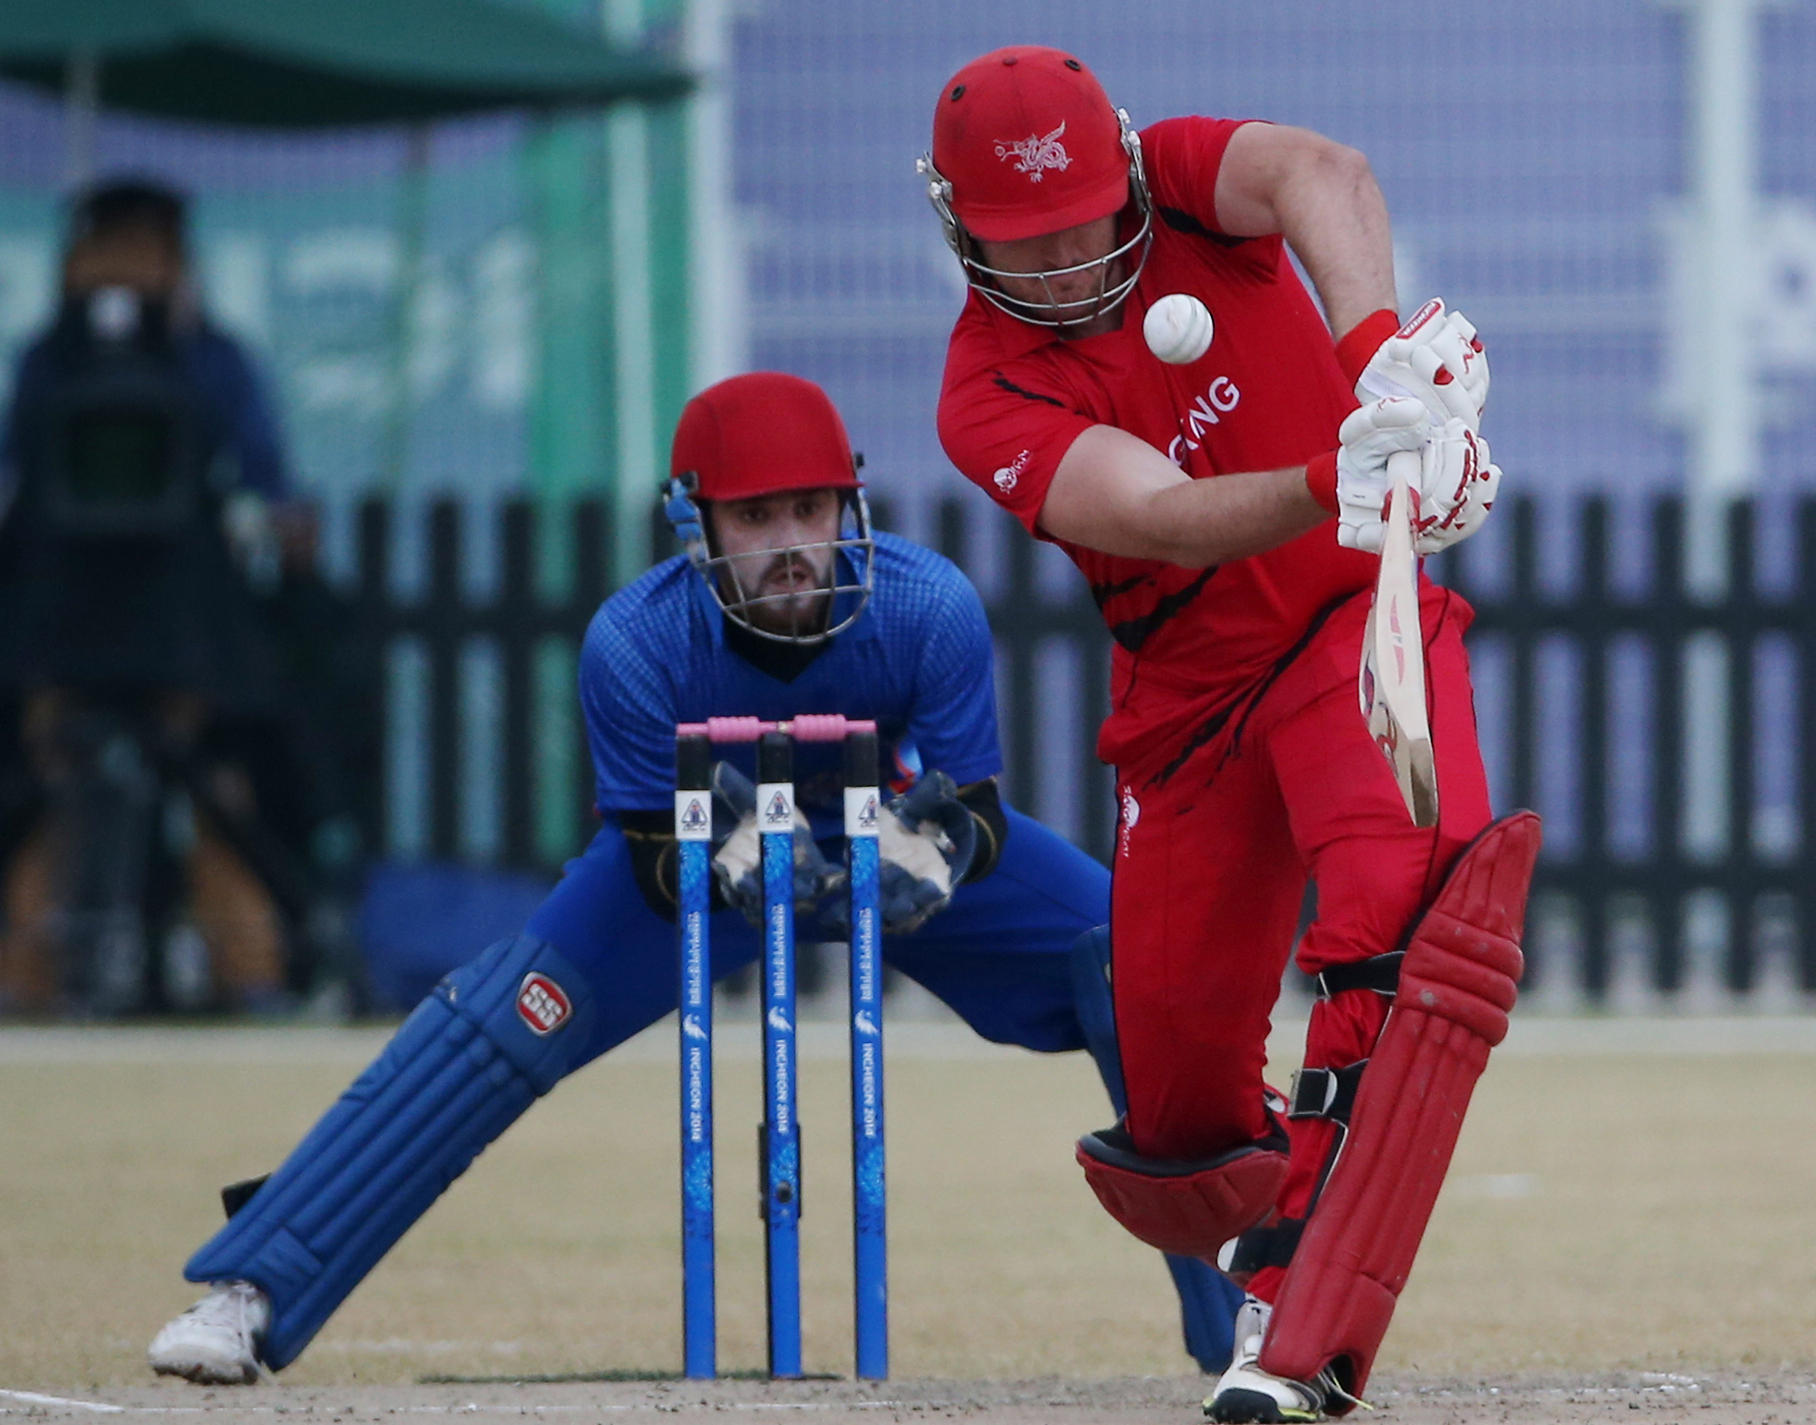 Jamie Atkinson at the wicket against Afghanistan. Photo: Nora Tam